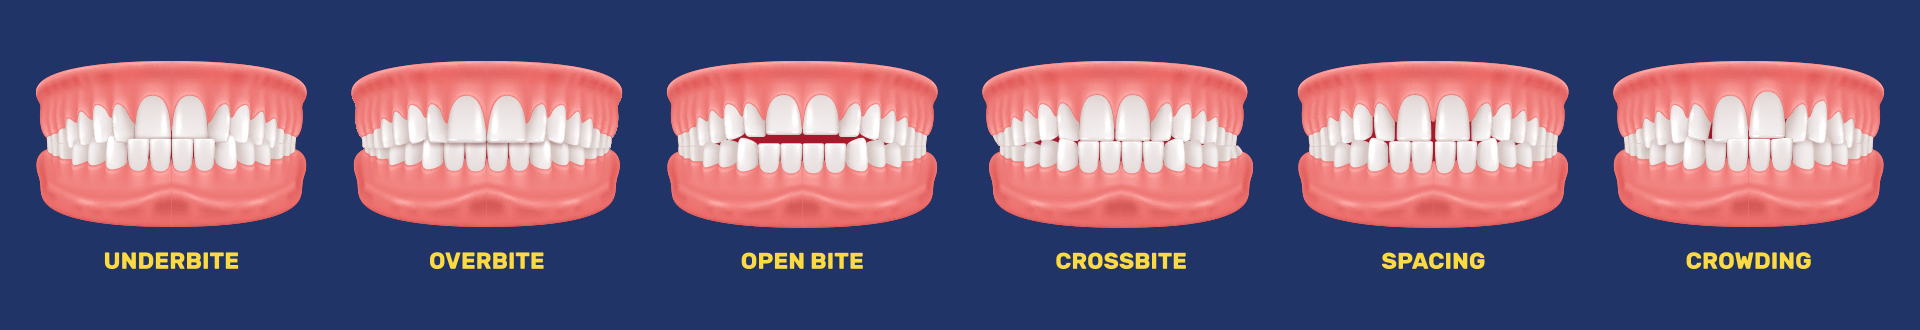 A diagram illustrating the progression of tooth decay, including stages of Open Bite, Crossbite, Overbite and Underbite.